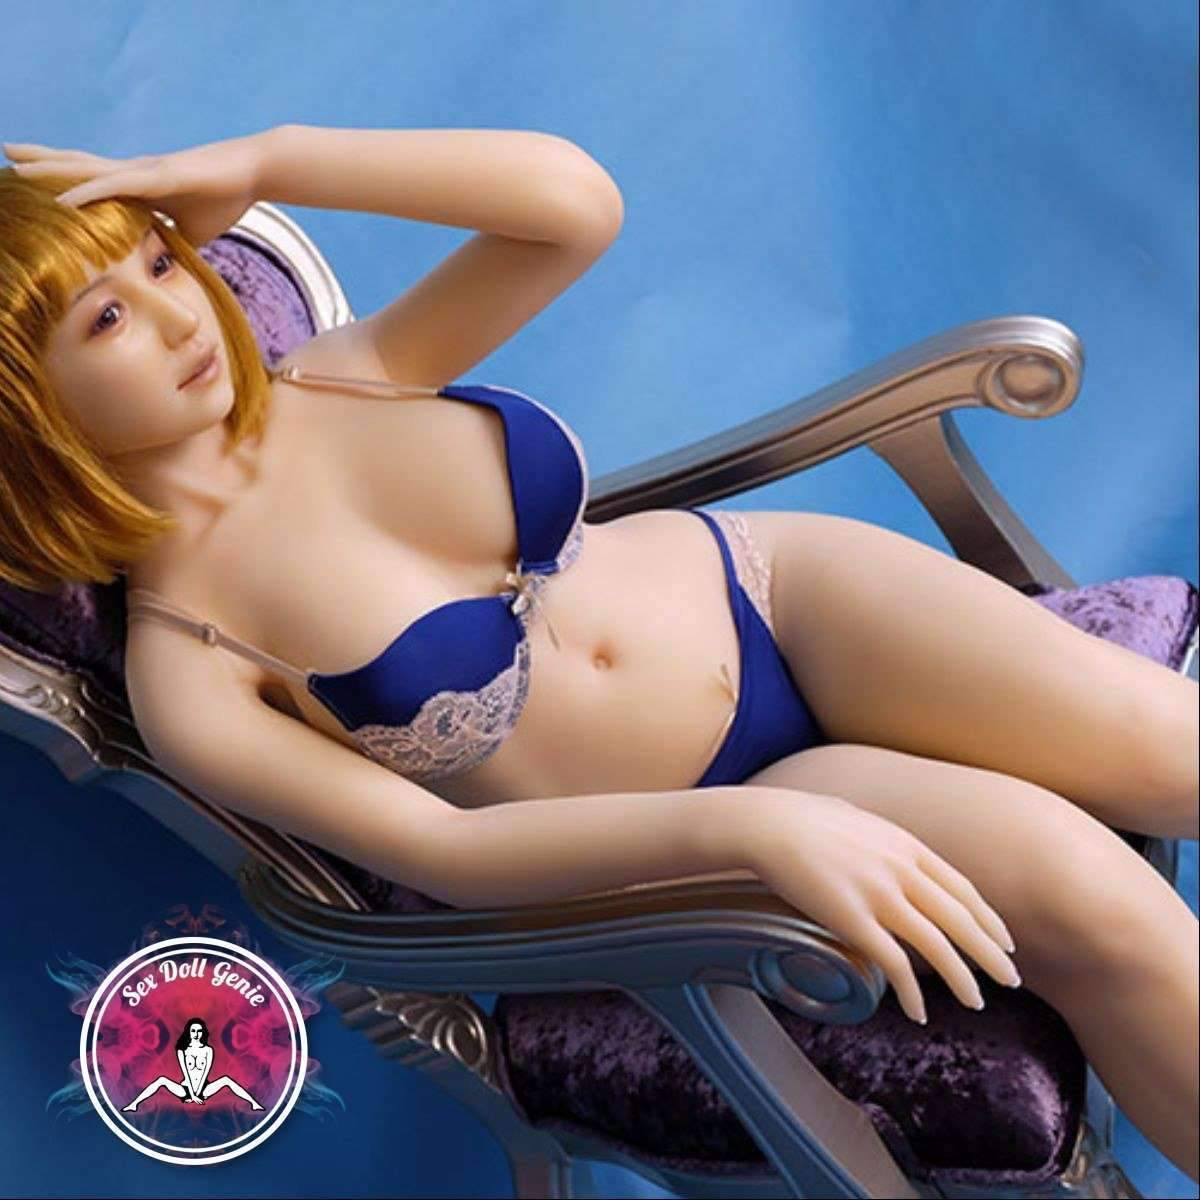 DS Doll - 158Plus - Nanase Head - Type 2 D Cup Silicone Doll-18